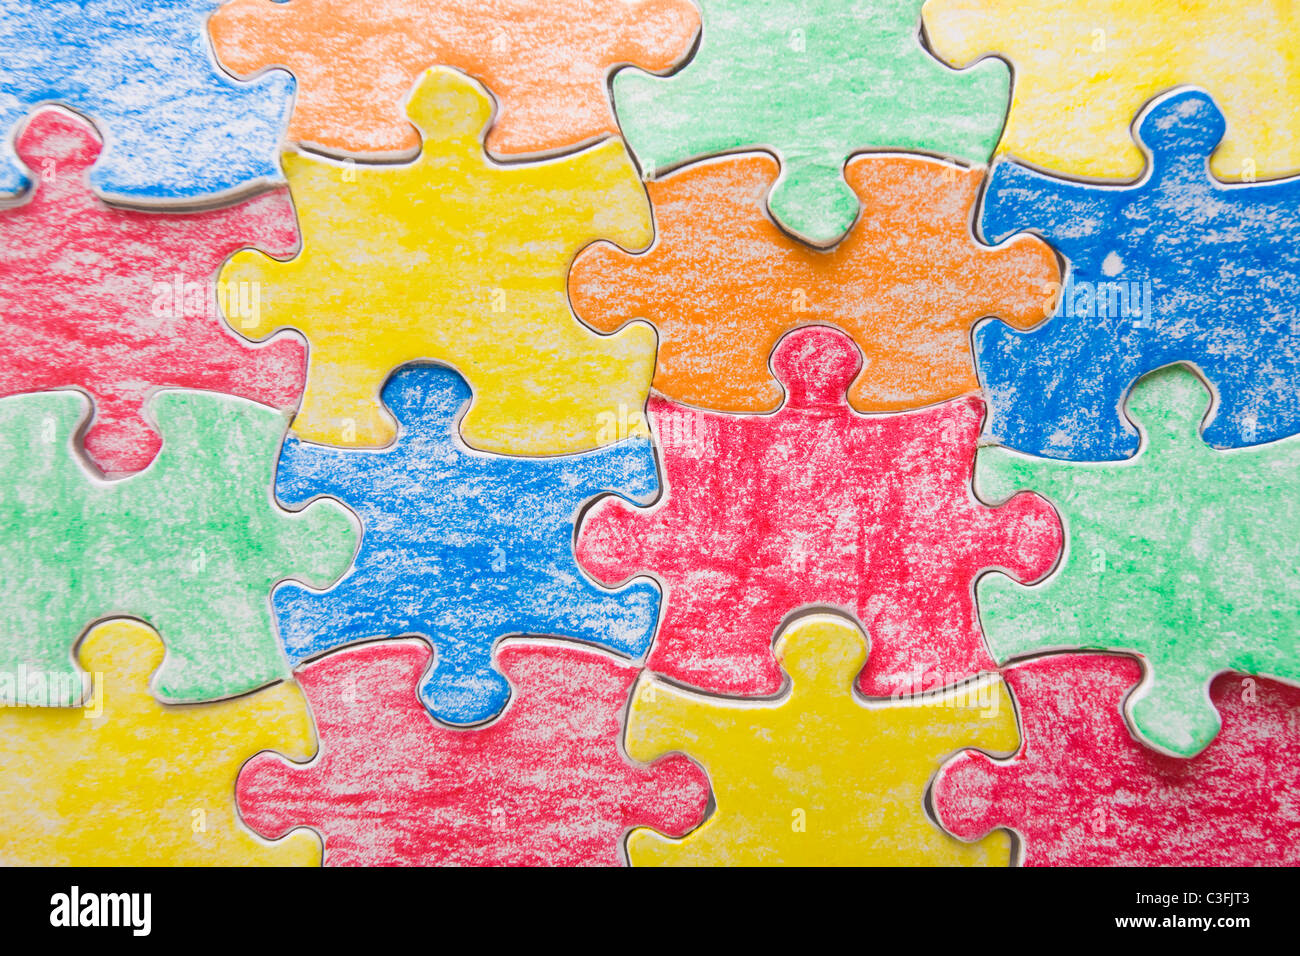 Colorful jigsaw pieces in a range of colors. Stock Photo